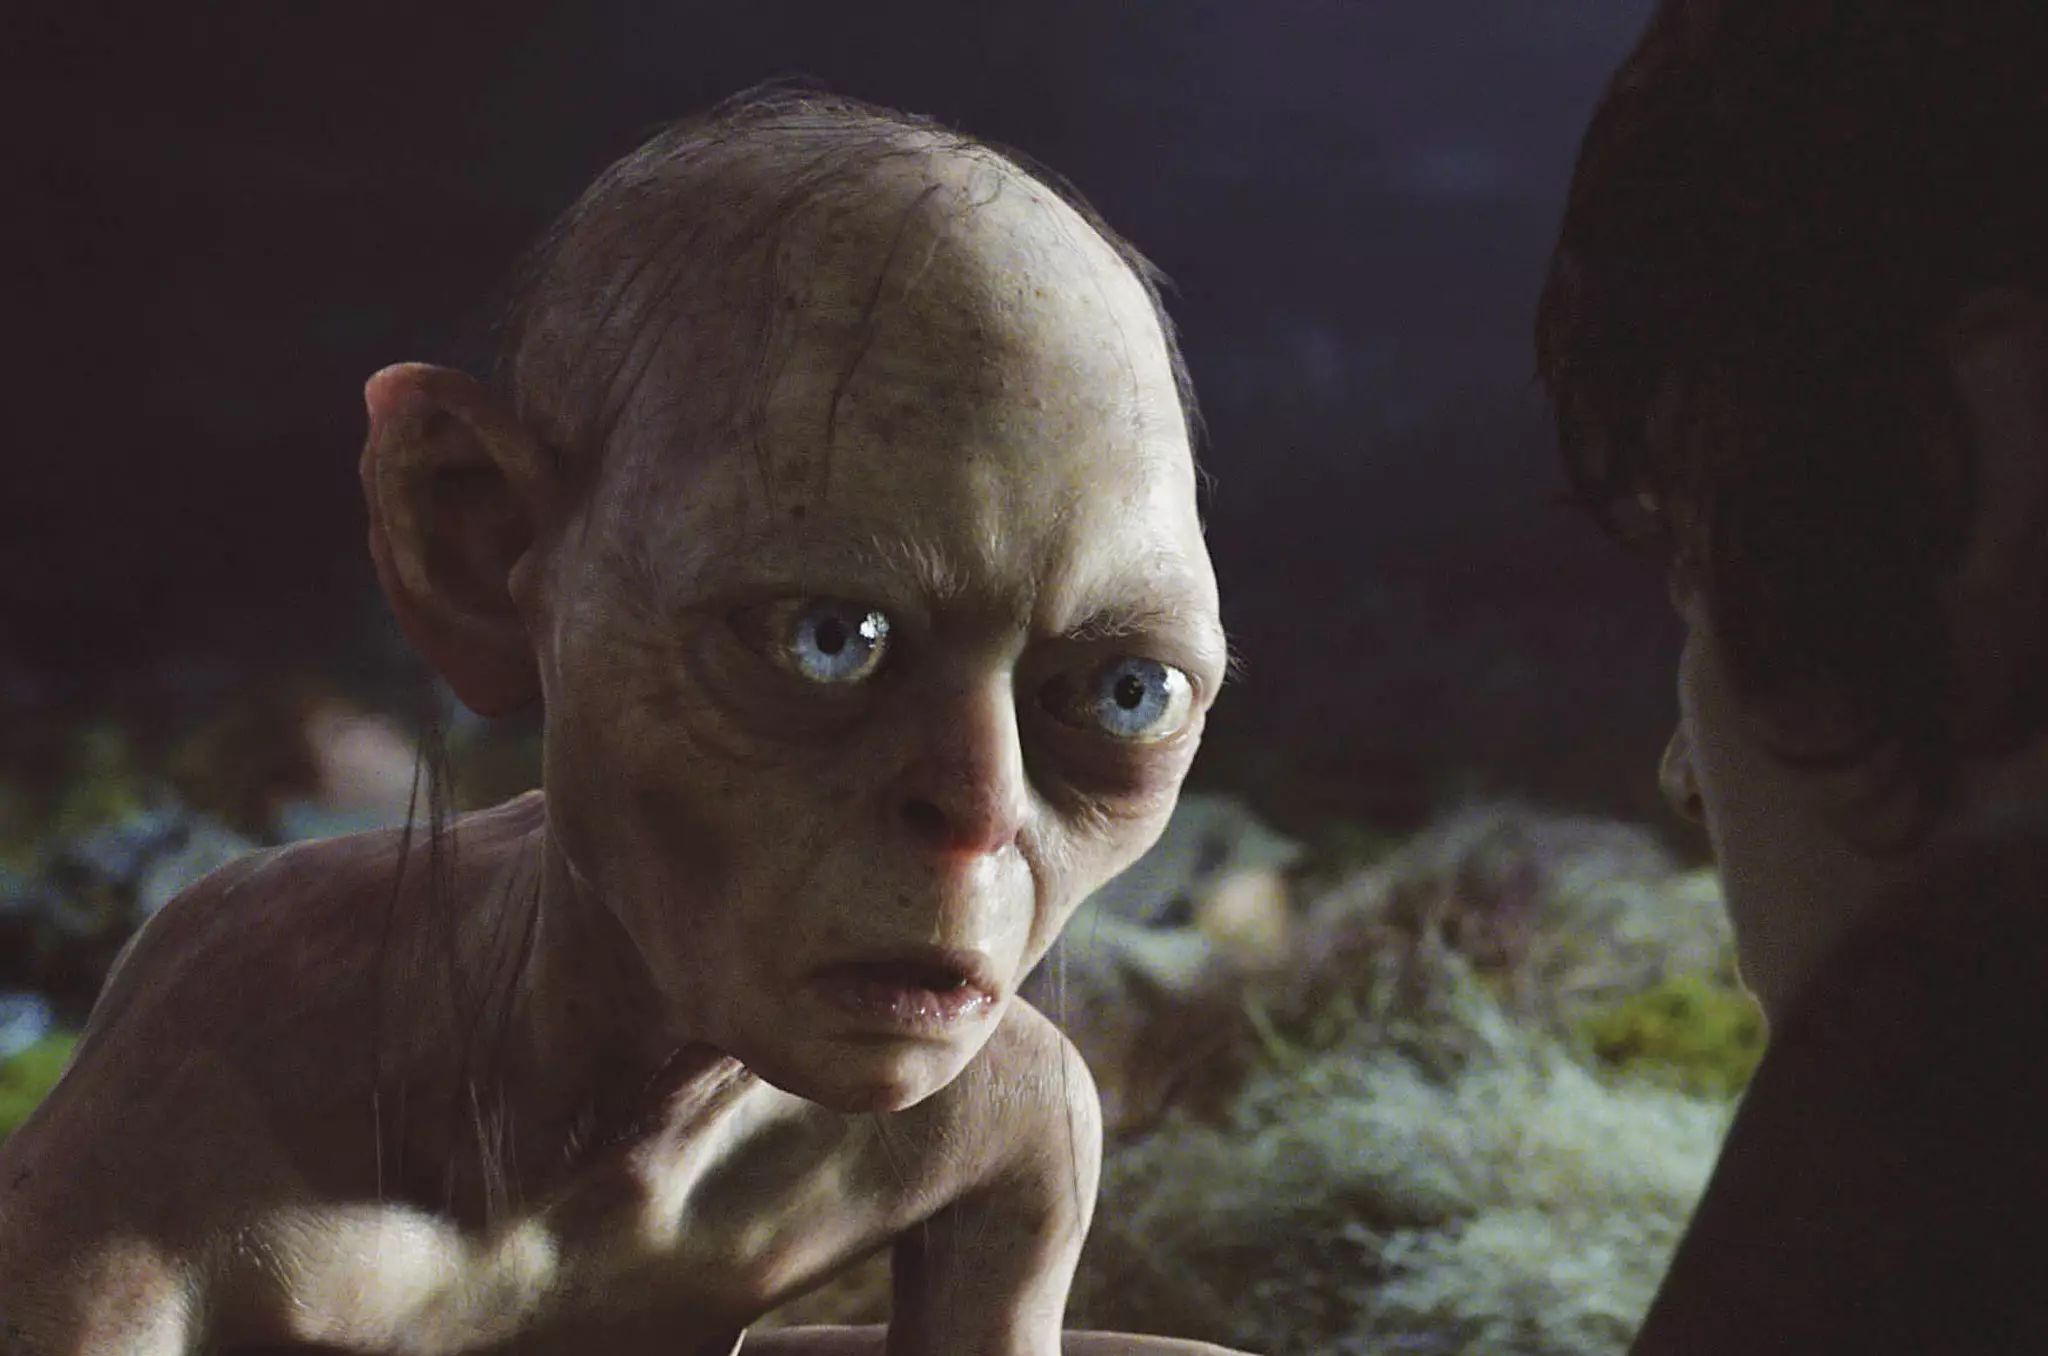 Serkis famously played Tolkien's character Gollum.